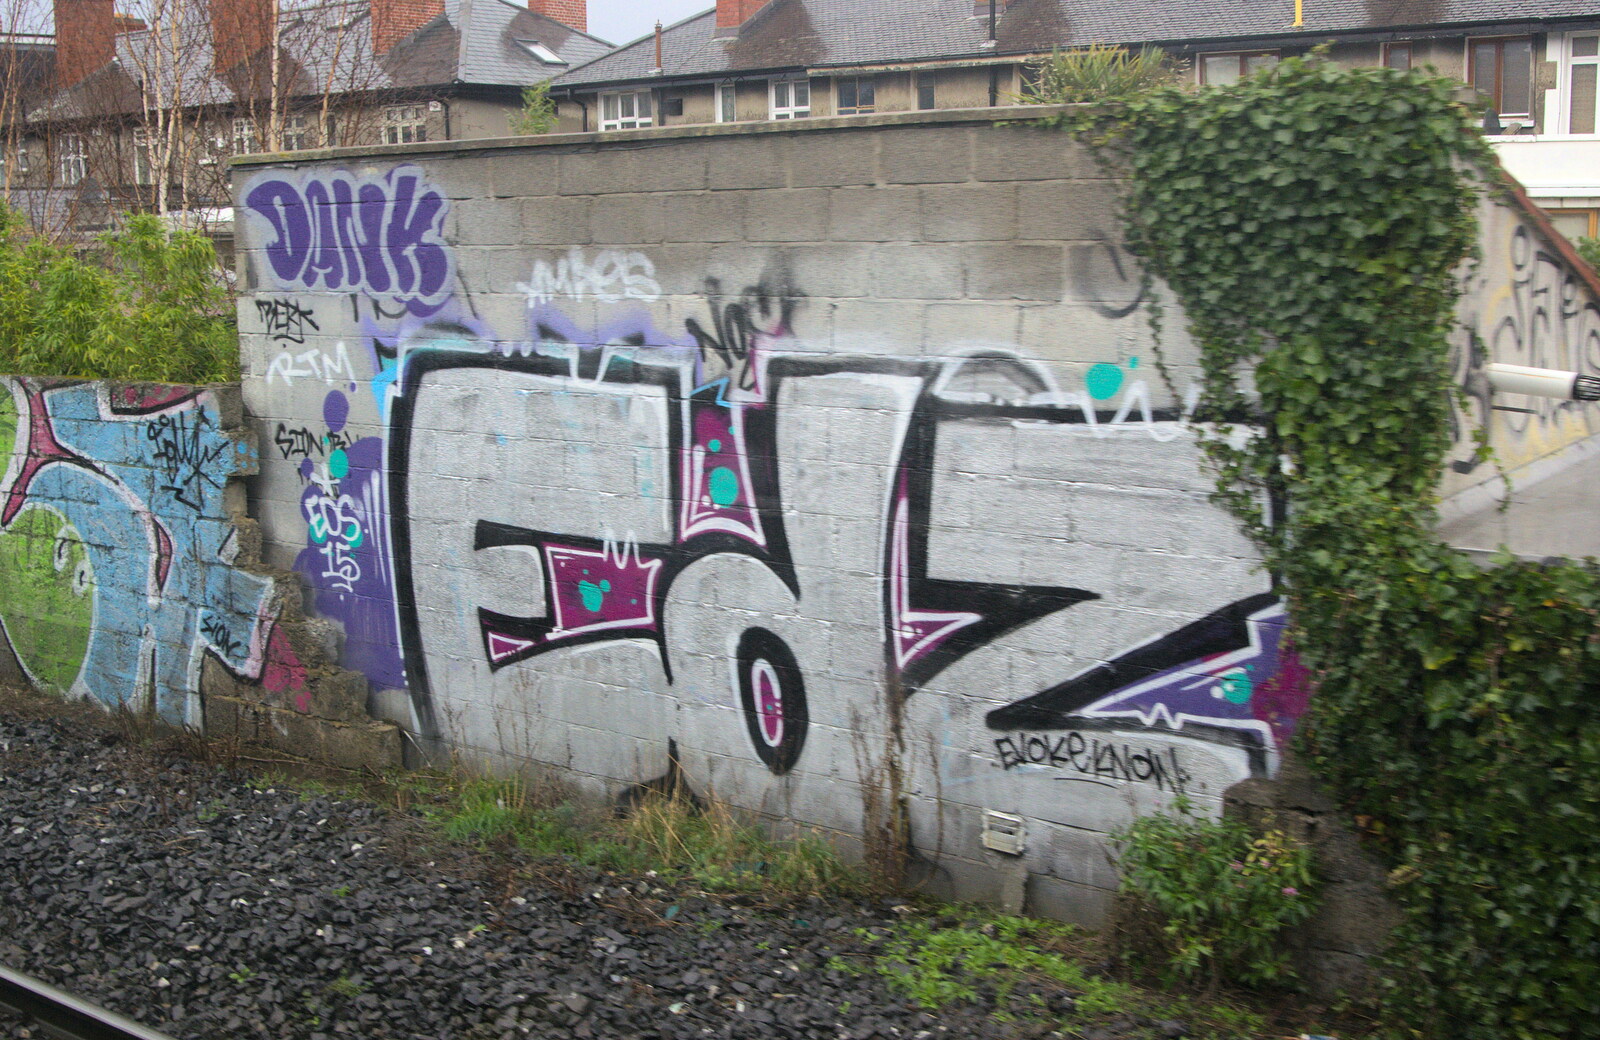 A silver Edz tag from Christmas Eve in Dublin and Blackrock, Ireland - 24th December 2015